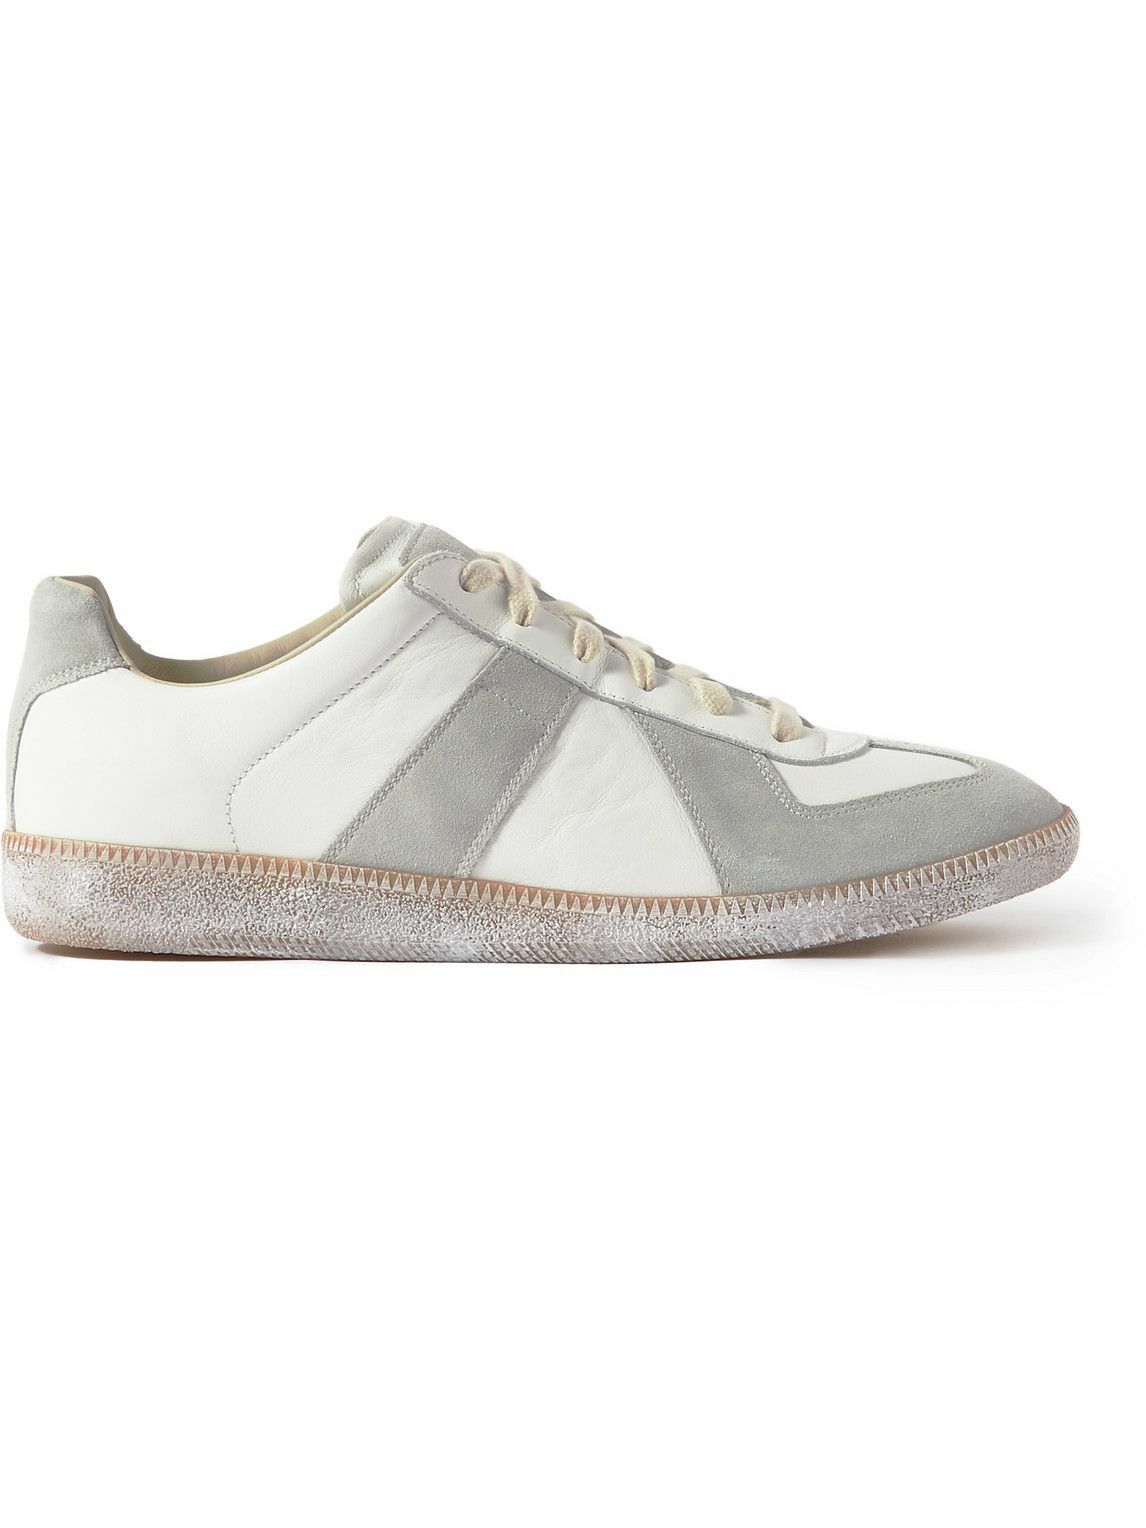 Photo: Maison Margiela - Replica Distressed Leather and Suede Sneakers - White